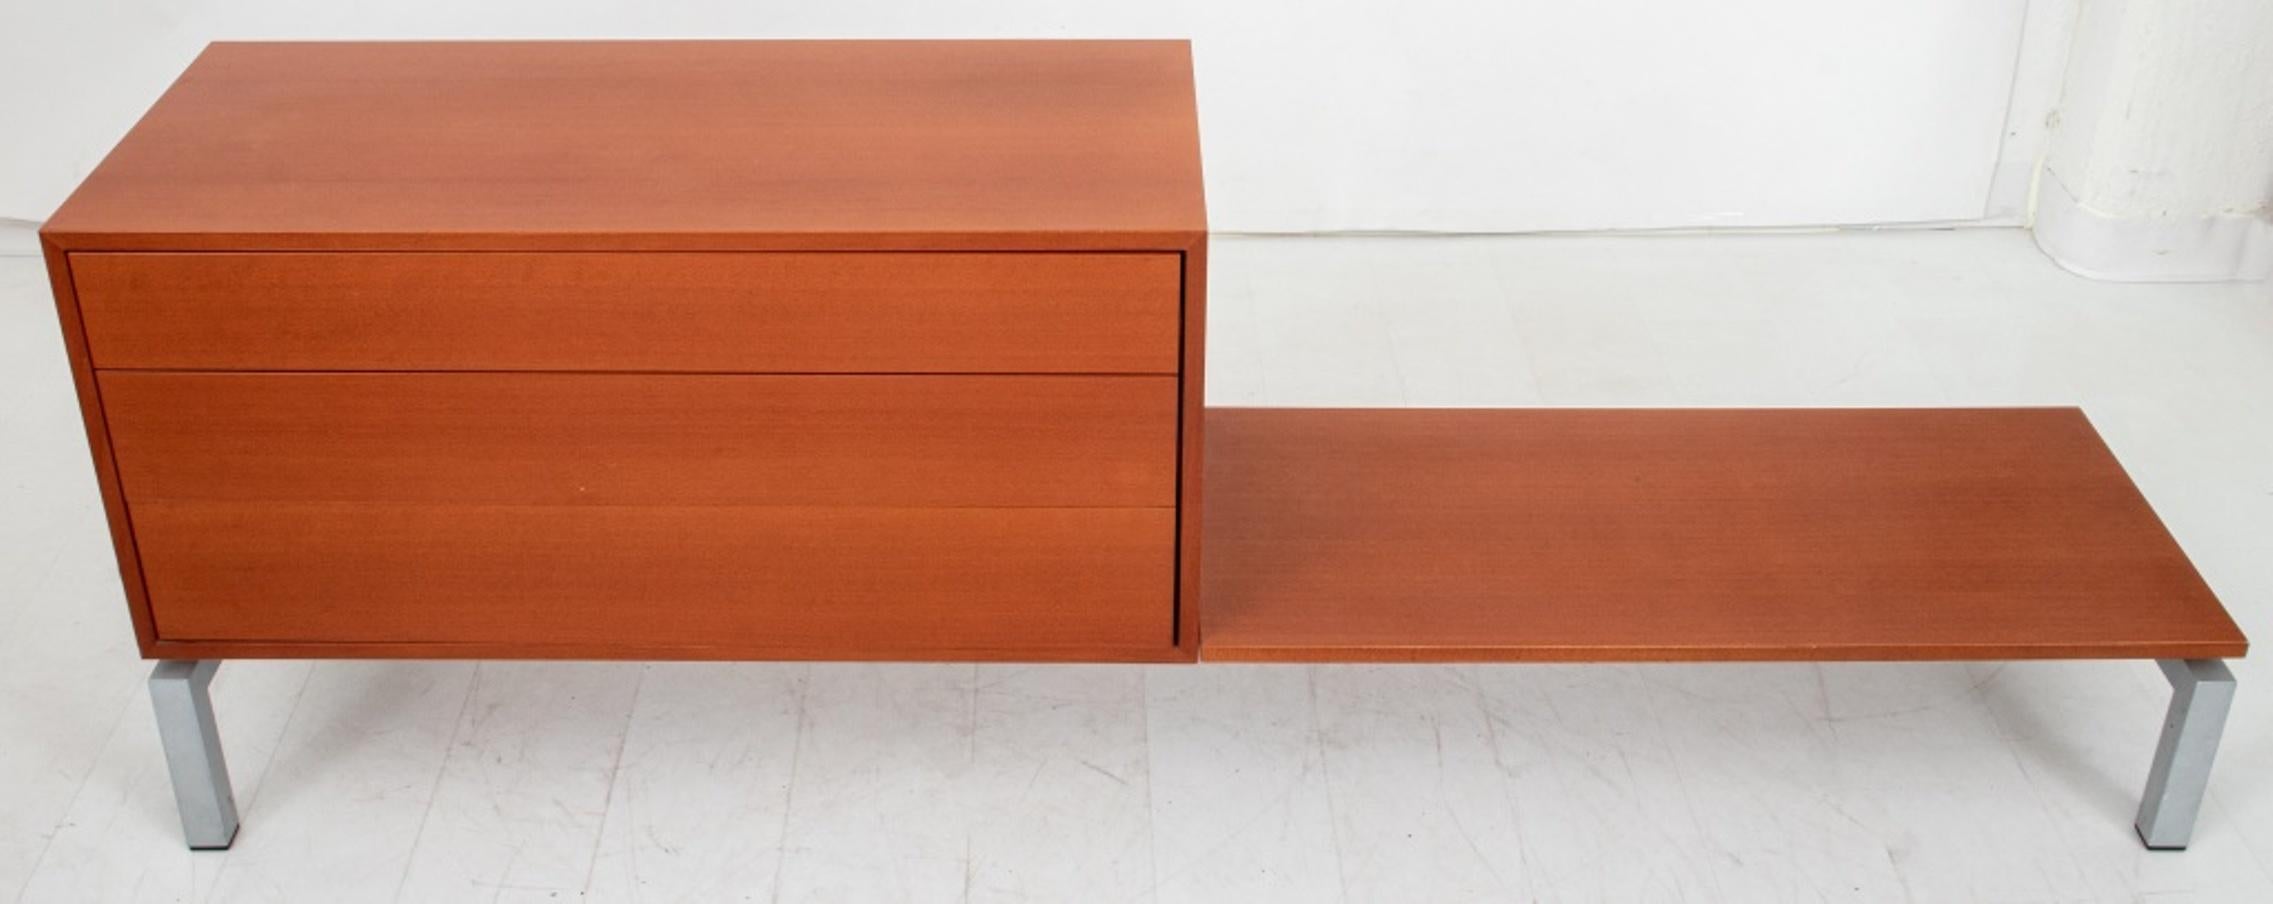 Hannes Wettstein (Swiss, 1958-2008) for Cassina, 1990's Xen Cabinet Bench L15 (designed) in beechwood stained cherrywood on a coated steel base.

Dimensions: 26.75